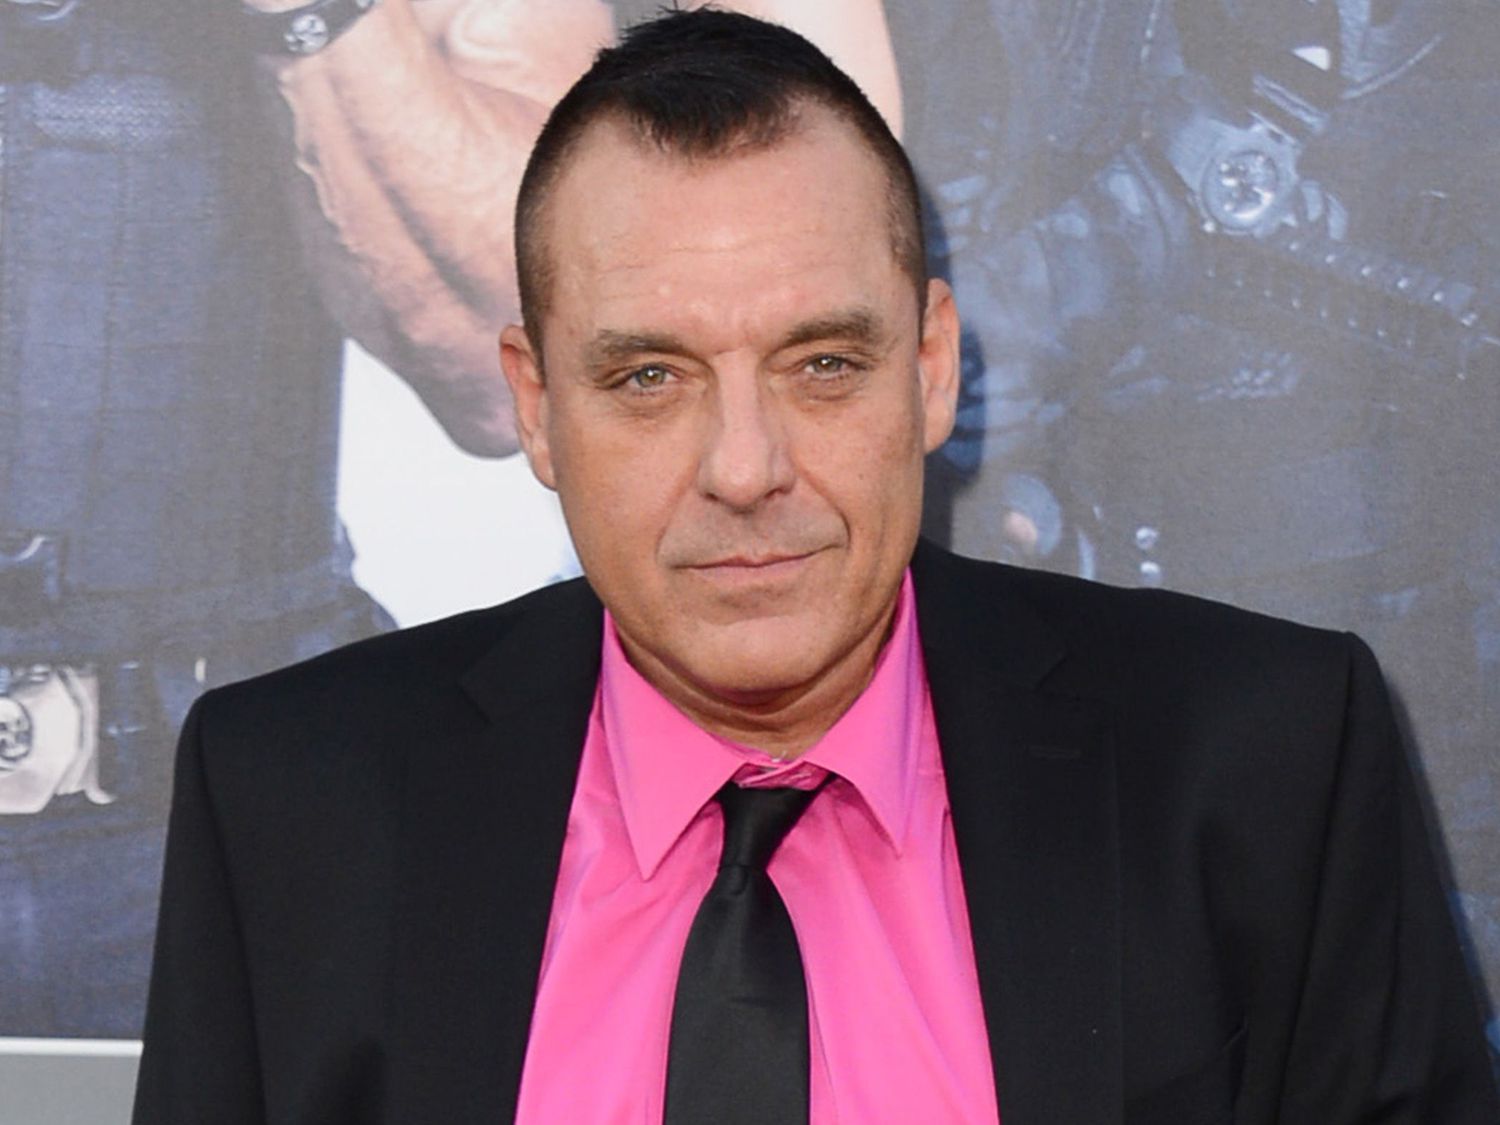 Tom Sizemore arrives at the premiere of "The Expendables 3" in Los Angeles